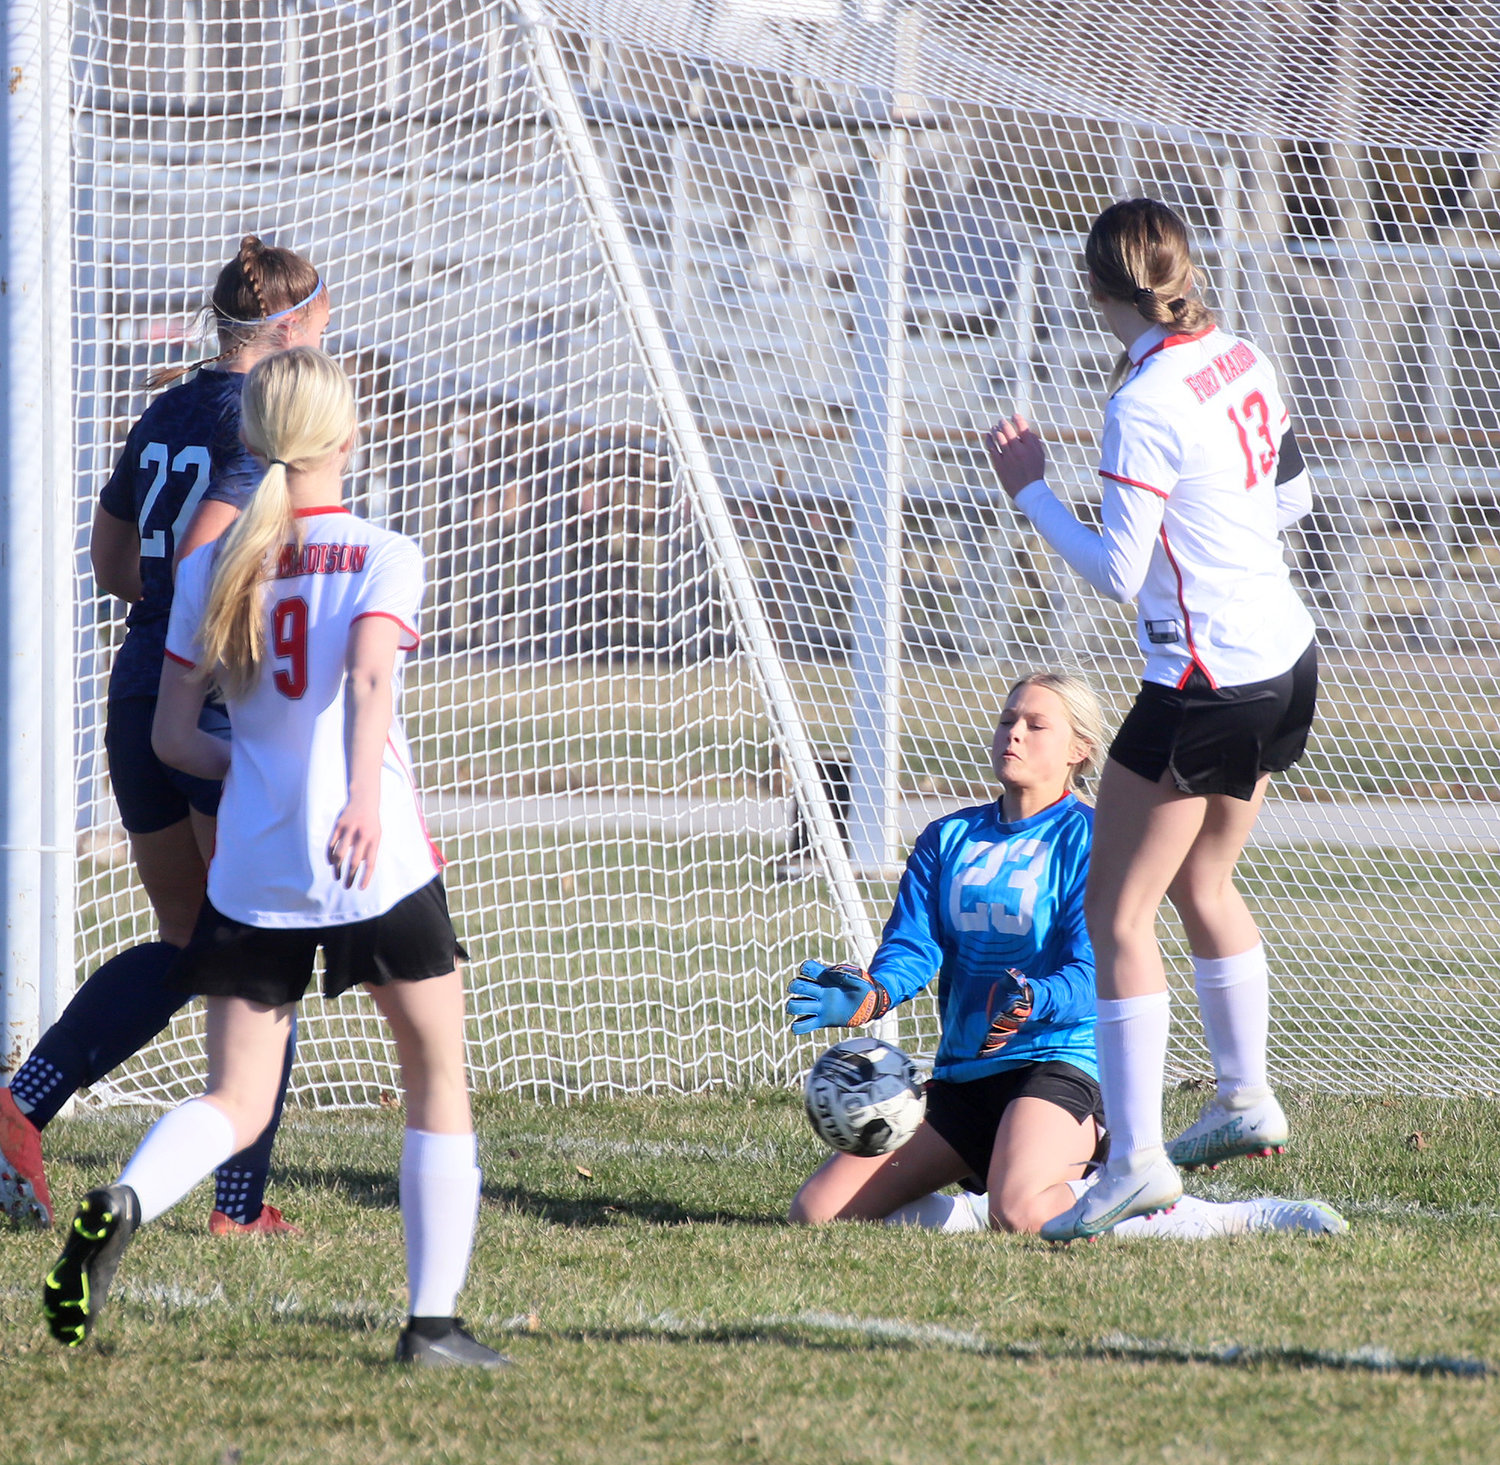 Bloodhound goalie Taylor Johnson blocks a shot on goal in Tuesday night in the Hounds' loss to the Nikes in Burlington.